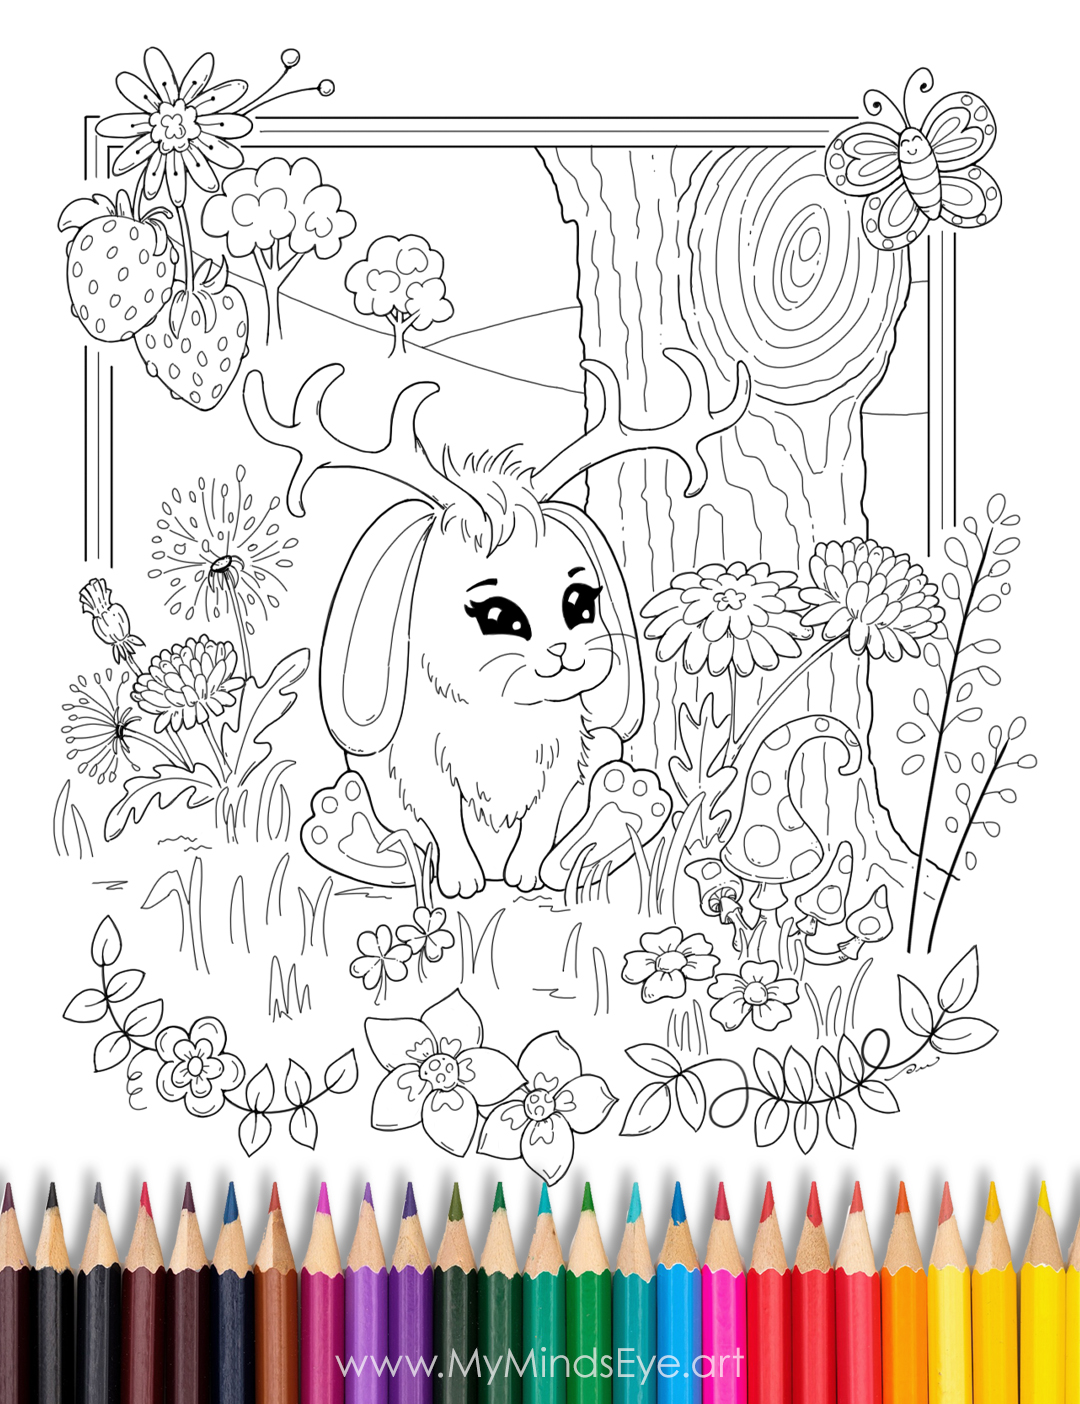 Image of an uncolored Jackalope bunny coloring page.